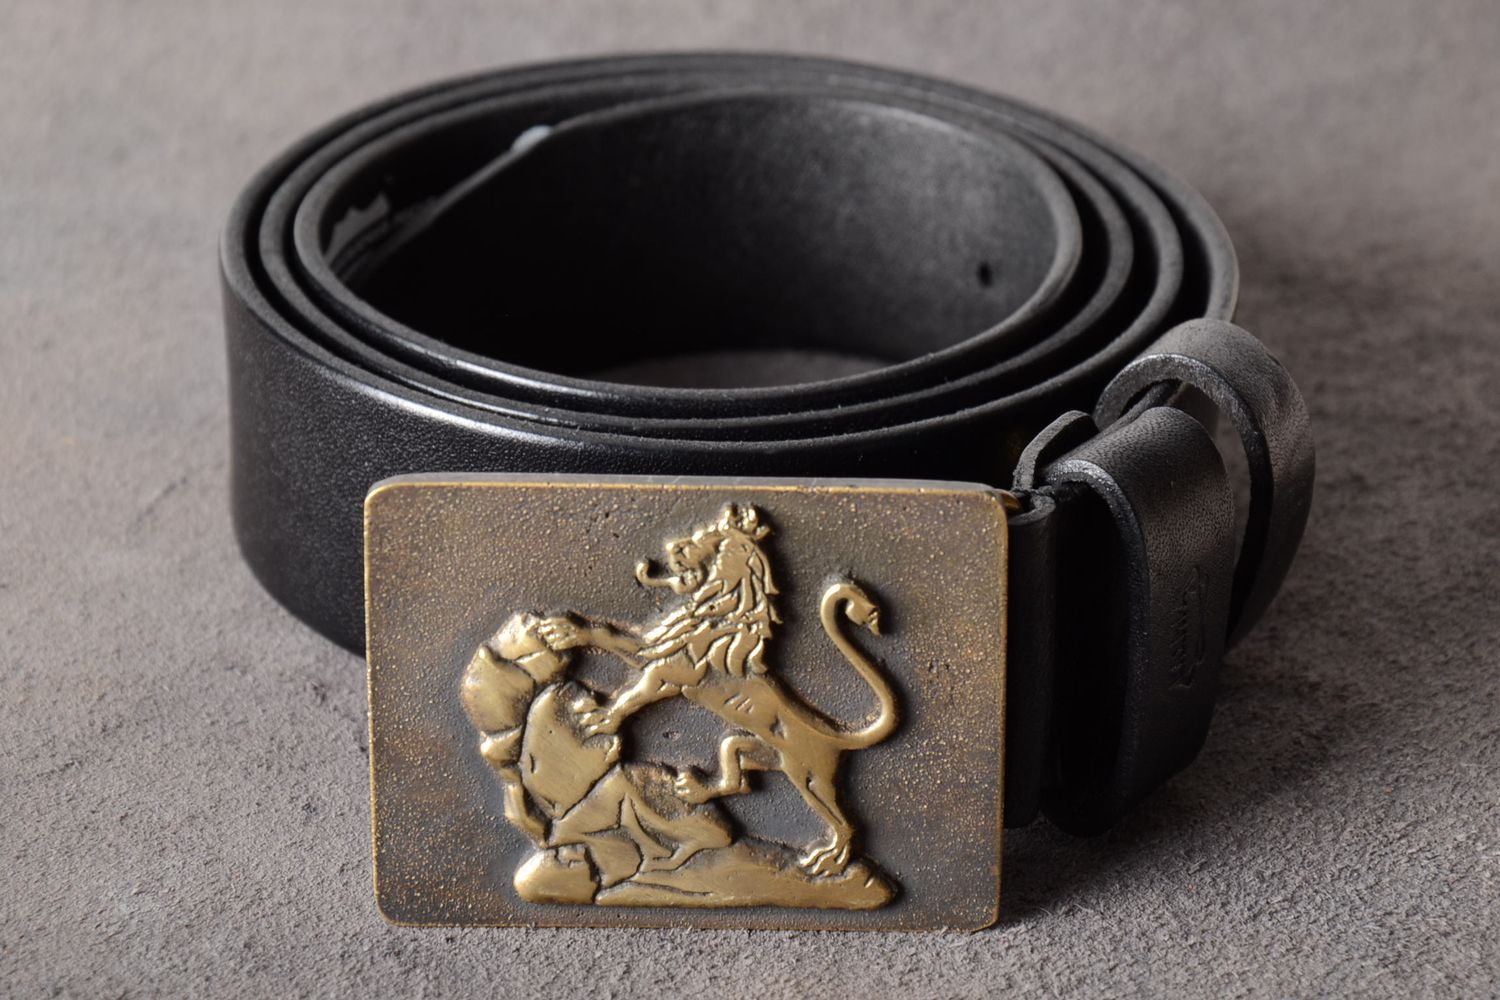 Handmade genuine leather belt with metal buckle in embossment in the shape of lion photo 1